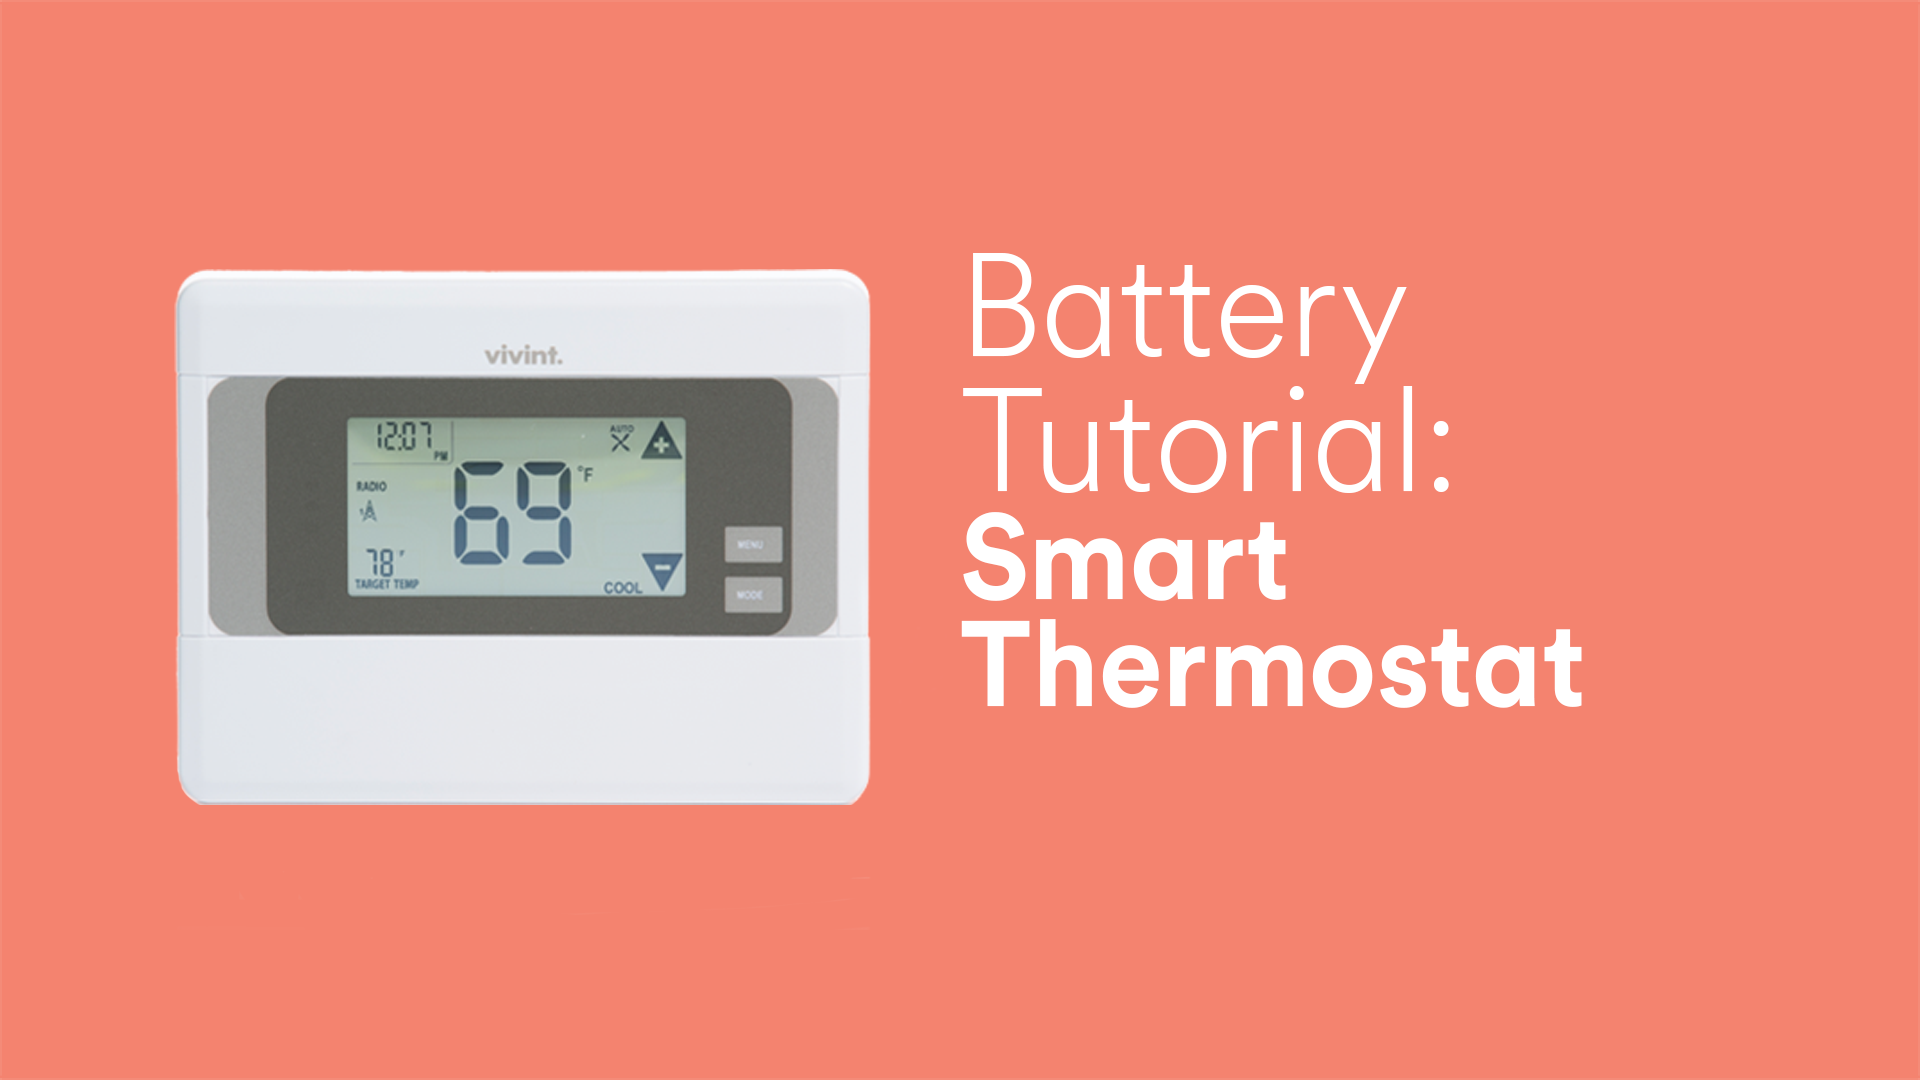 How To Change The Batteries In Your Thermostat 